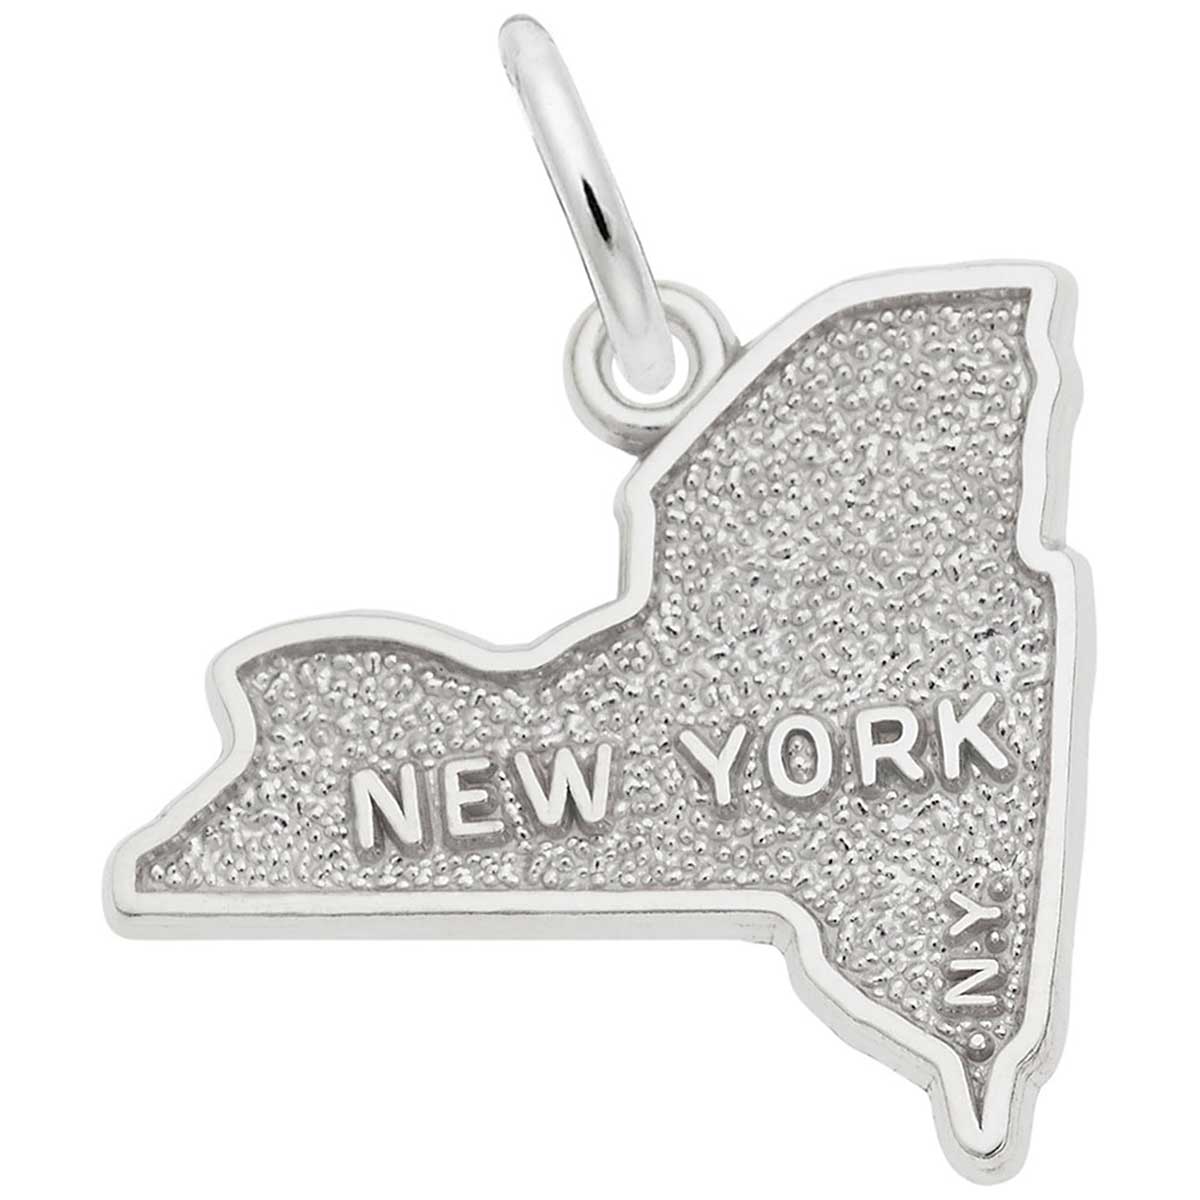 Rembrandt New York Charm, Sterling Silver